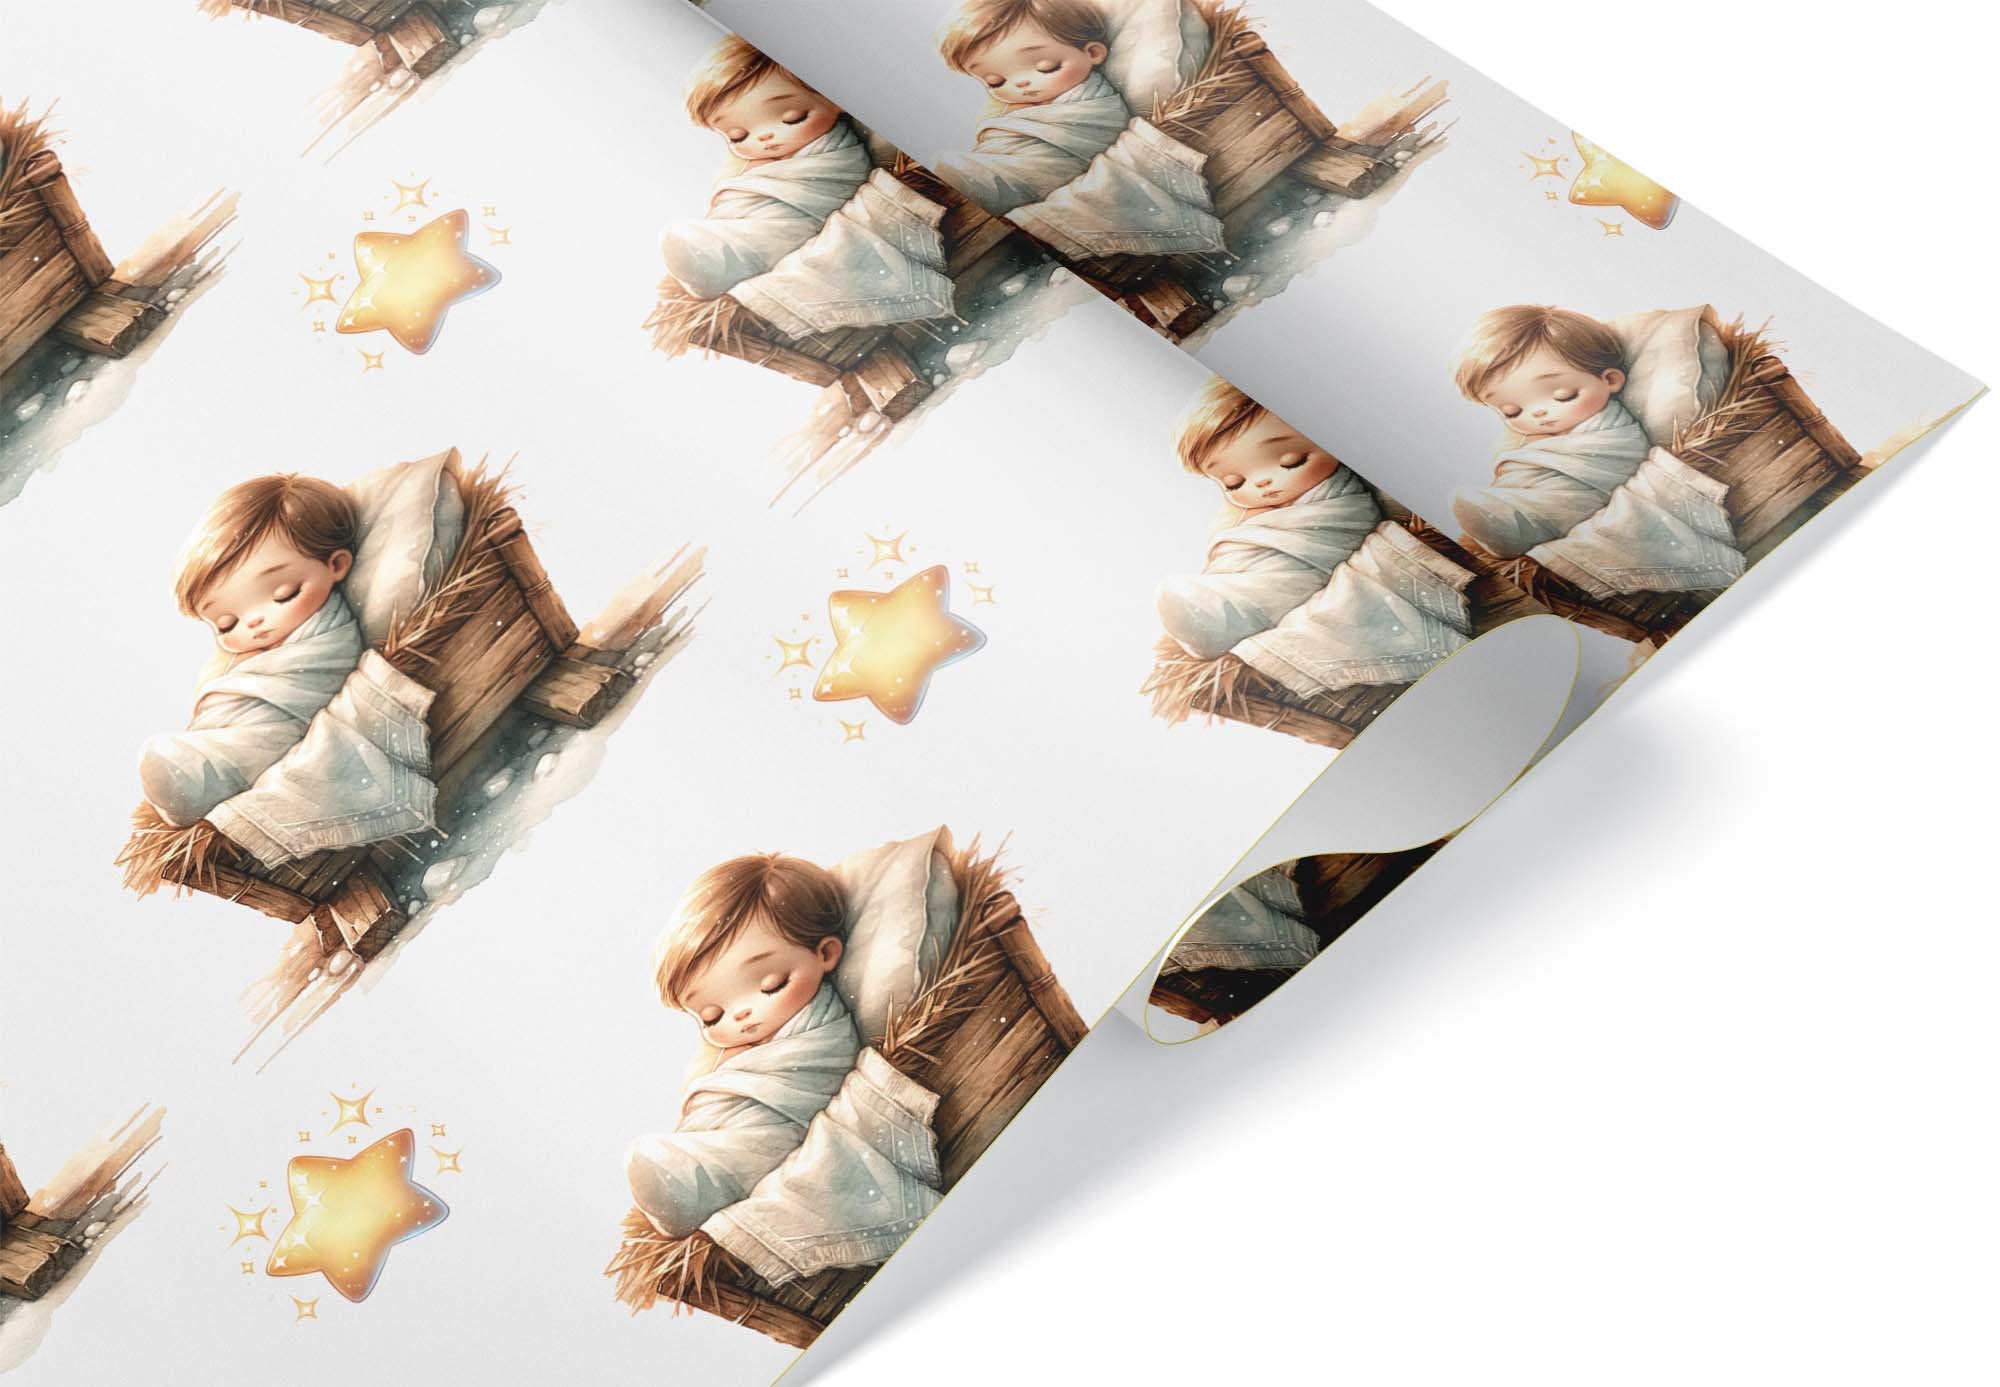  Cute White Elephant Thick Wrapping Paper, Gift